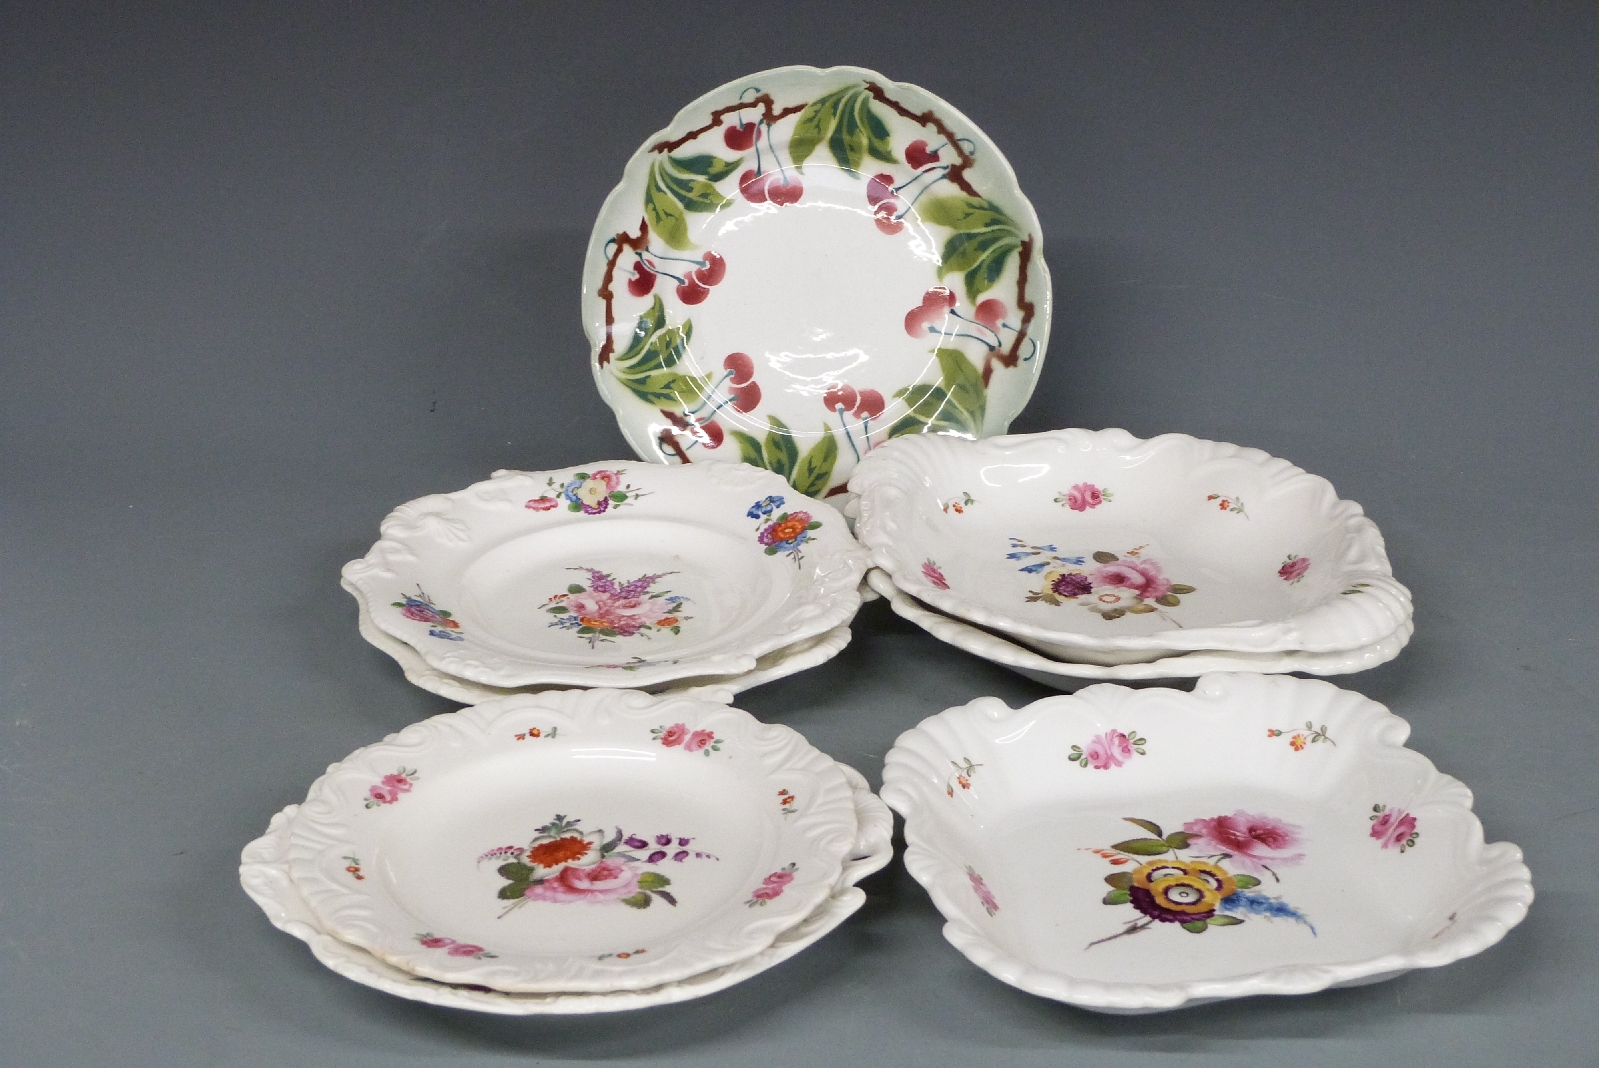 Continental dessert service, Chinese and Japanese export plates, French plates and a German ribbon - Image 2 of 2